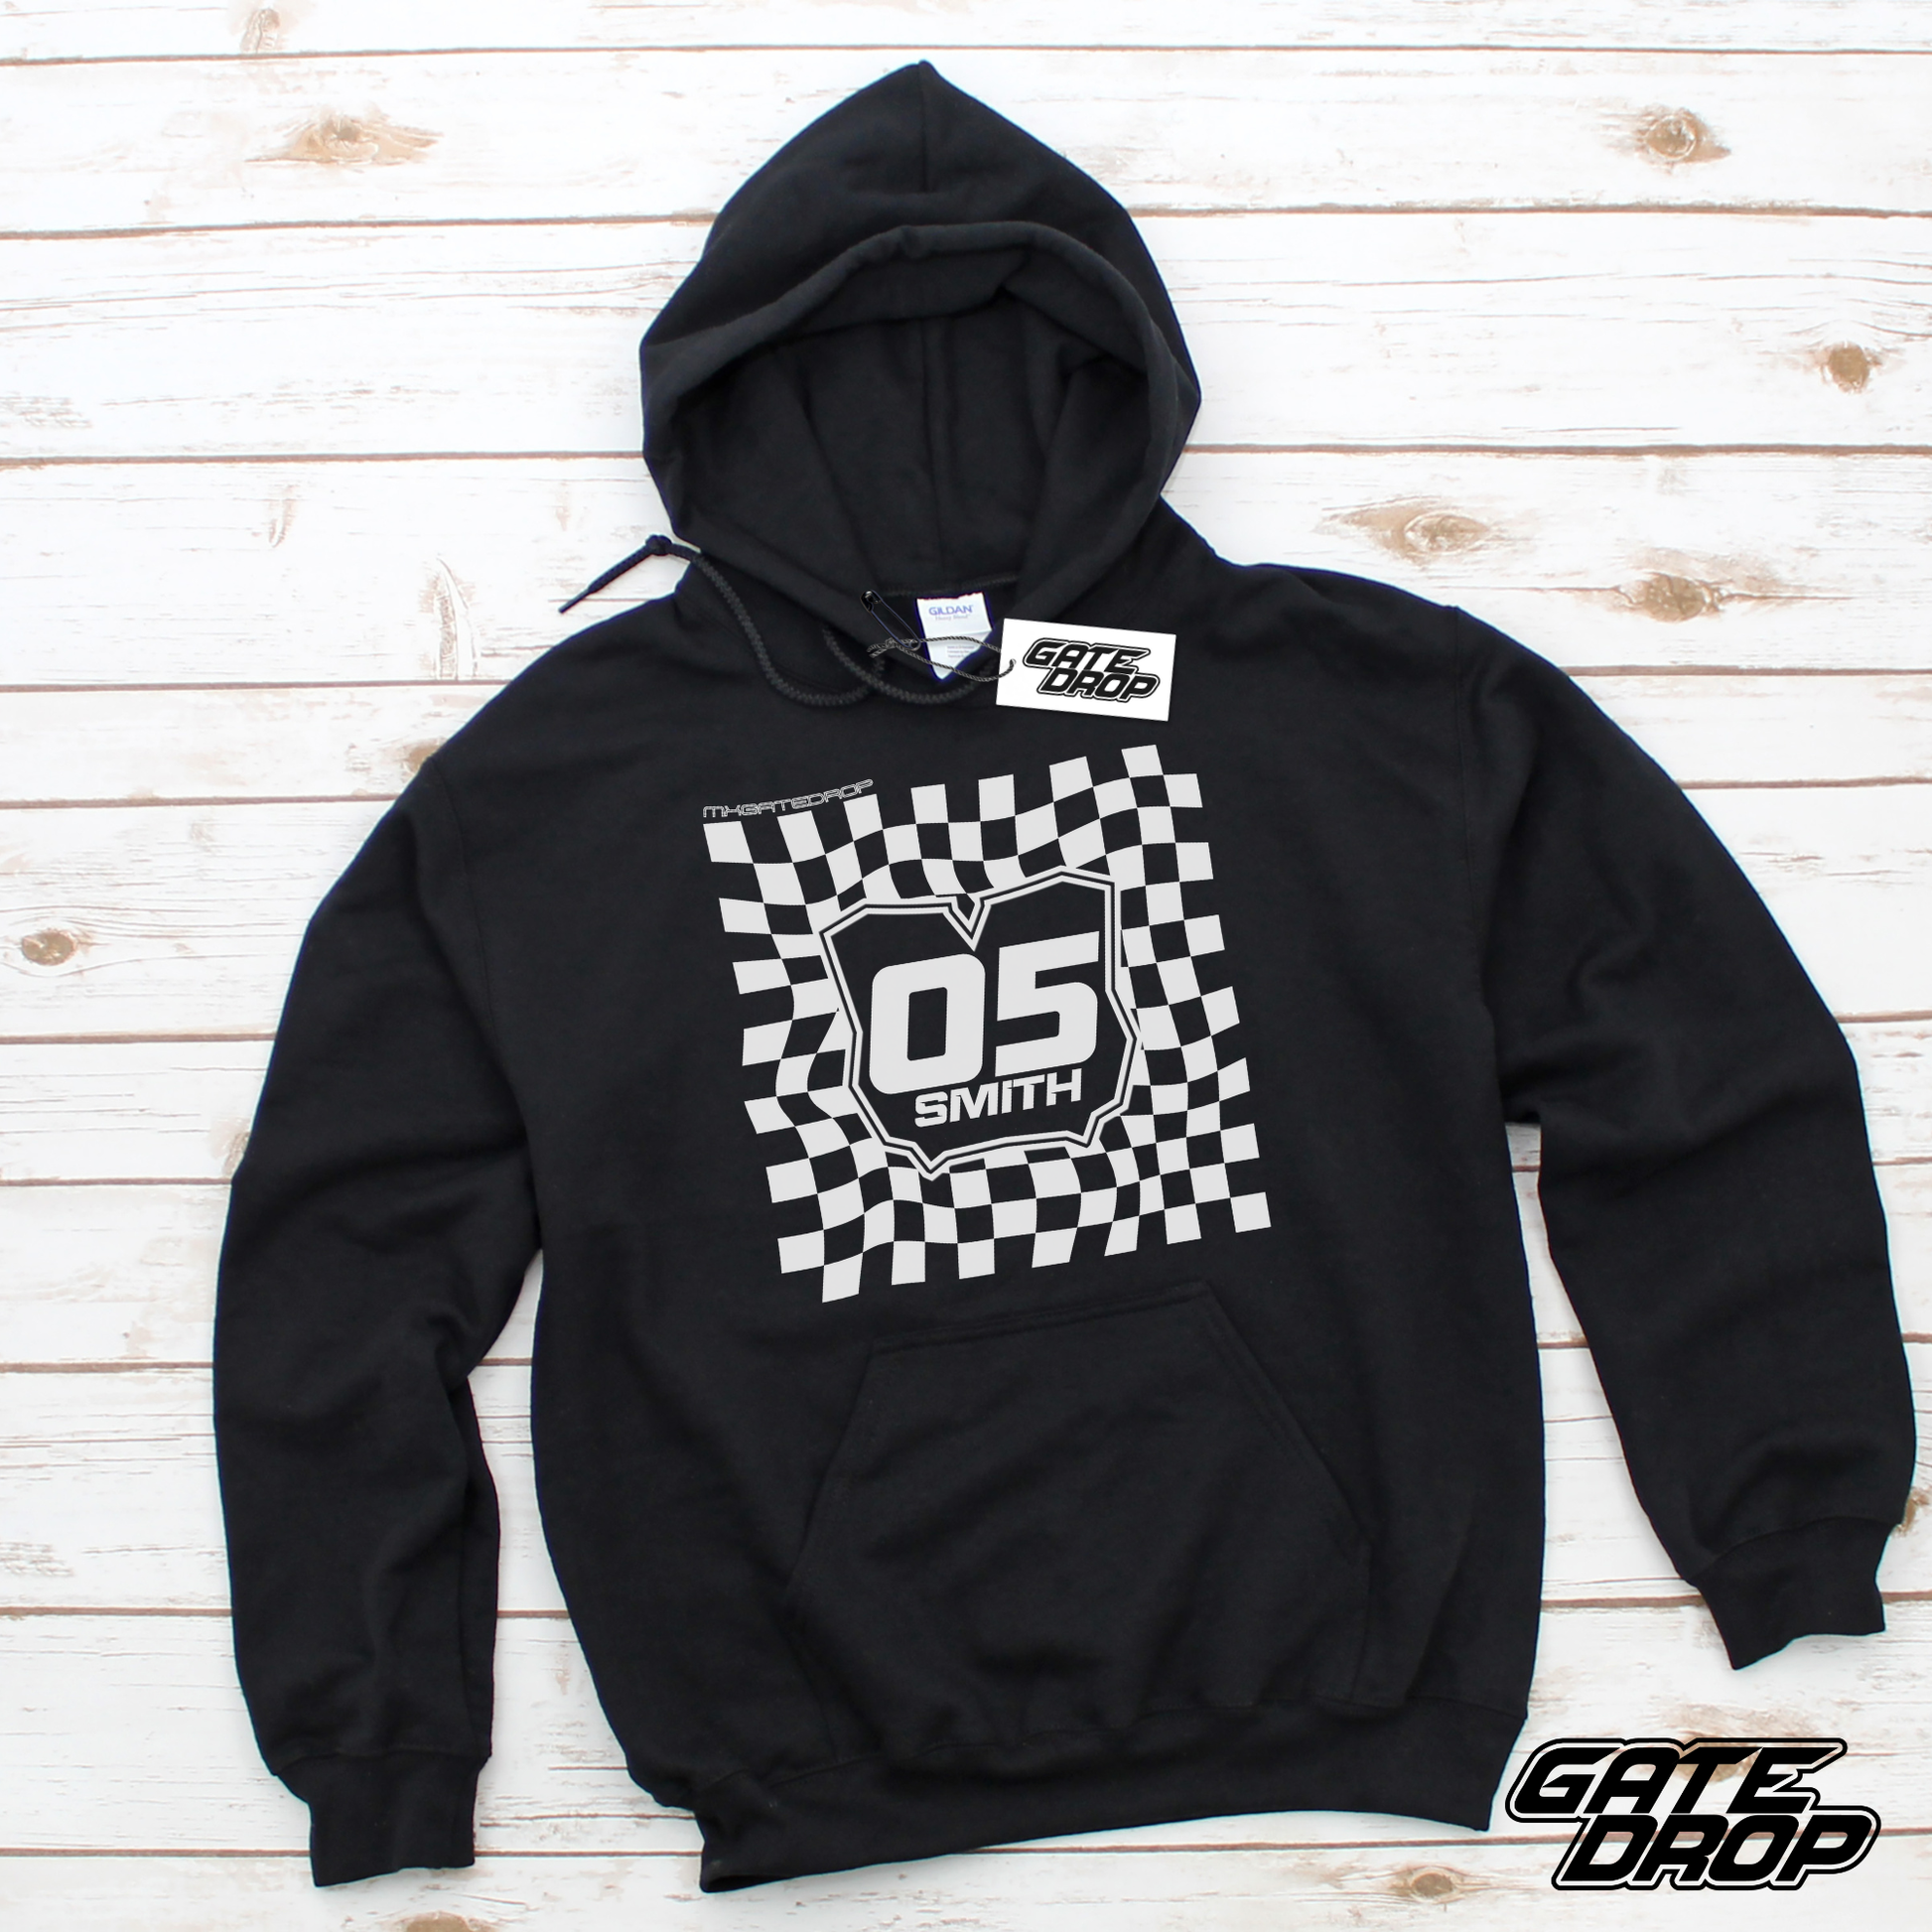 Gate Drop Personalized Checkered Adult Plate Hoodie